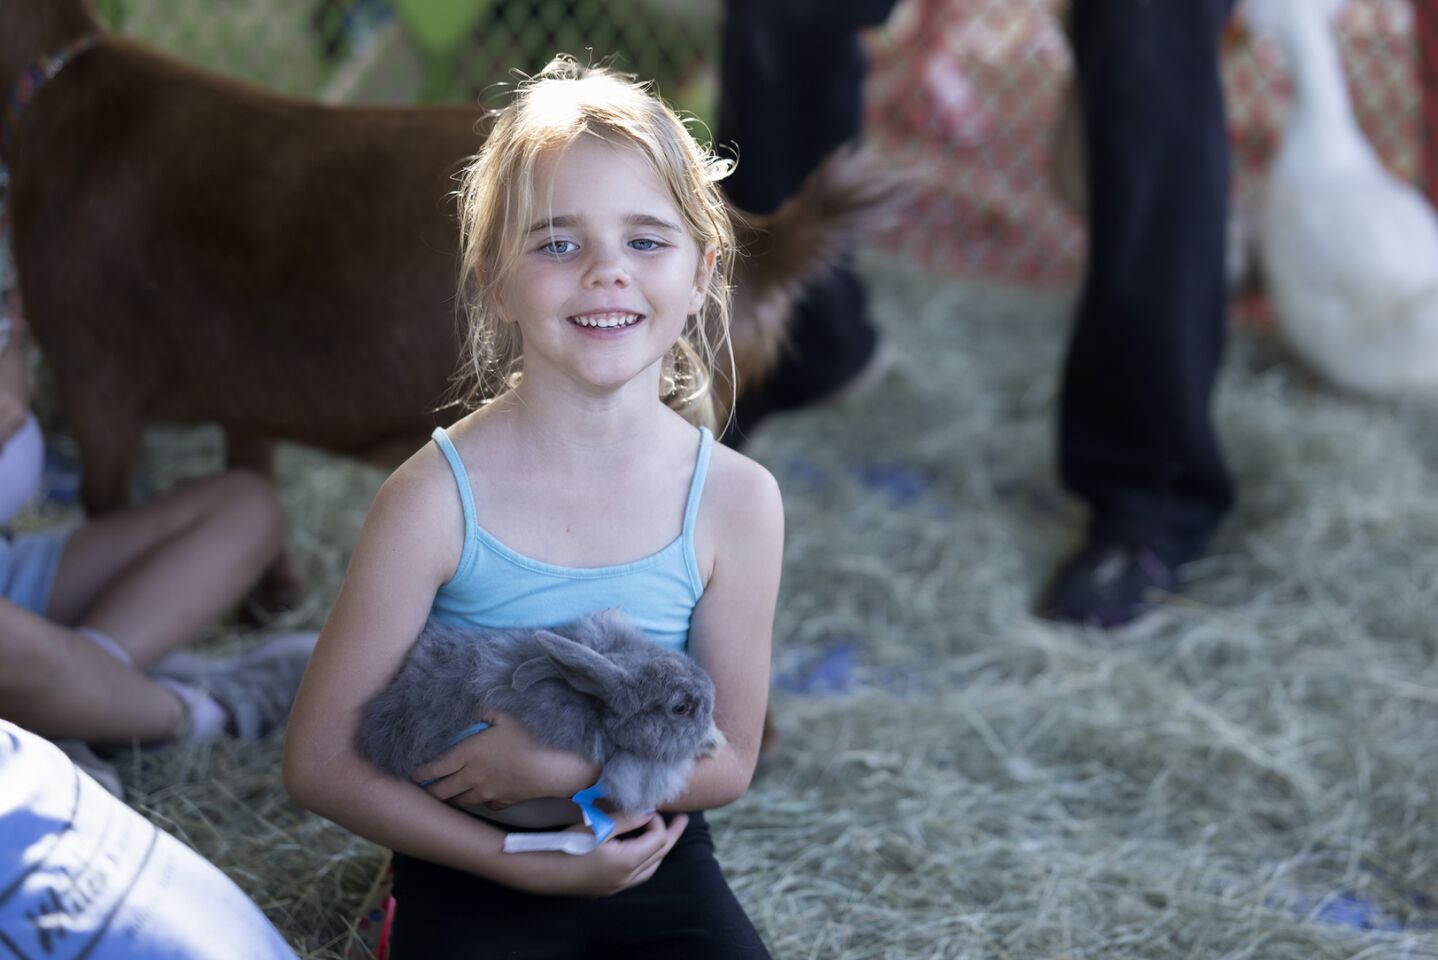 Amelie McCandless holds a bunny in the petting zoo